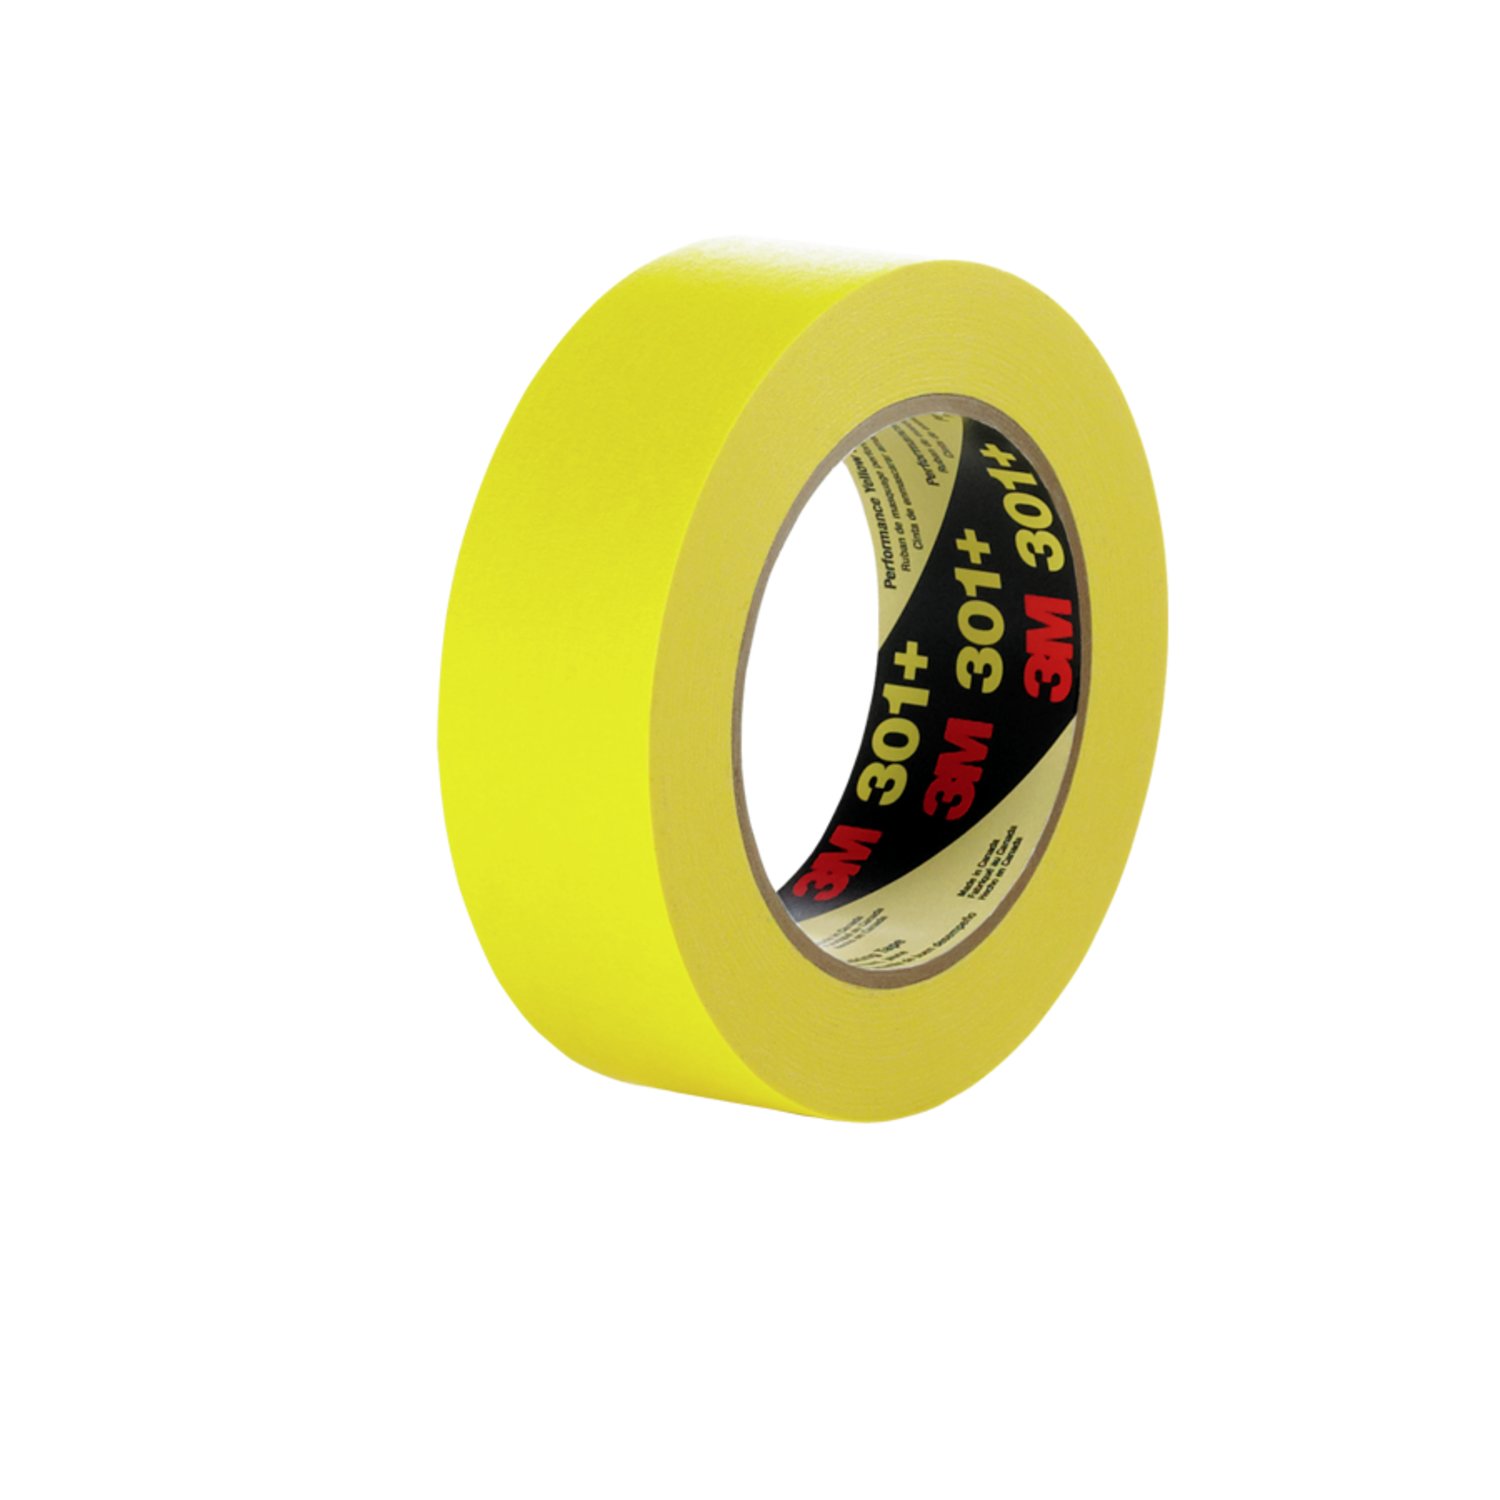 7000124893 - 3M Performance Yellow Masking Tape 301+, 96 mm x 55 m, 6.3 mil, 8
Roll/Case